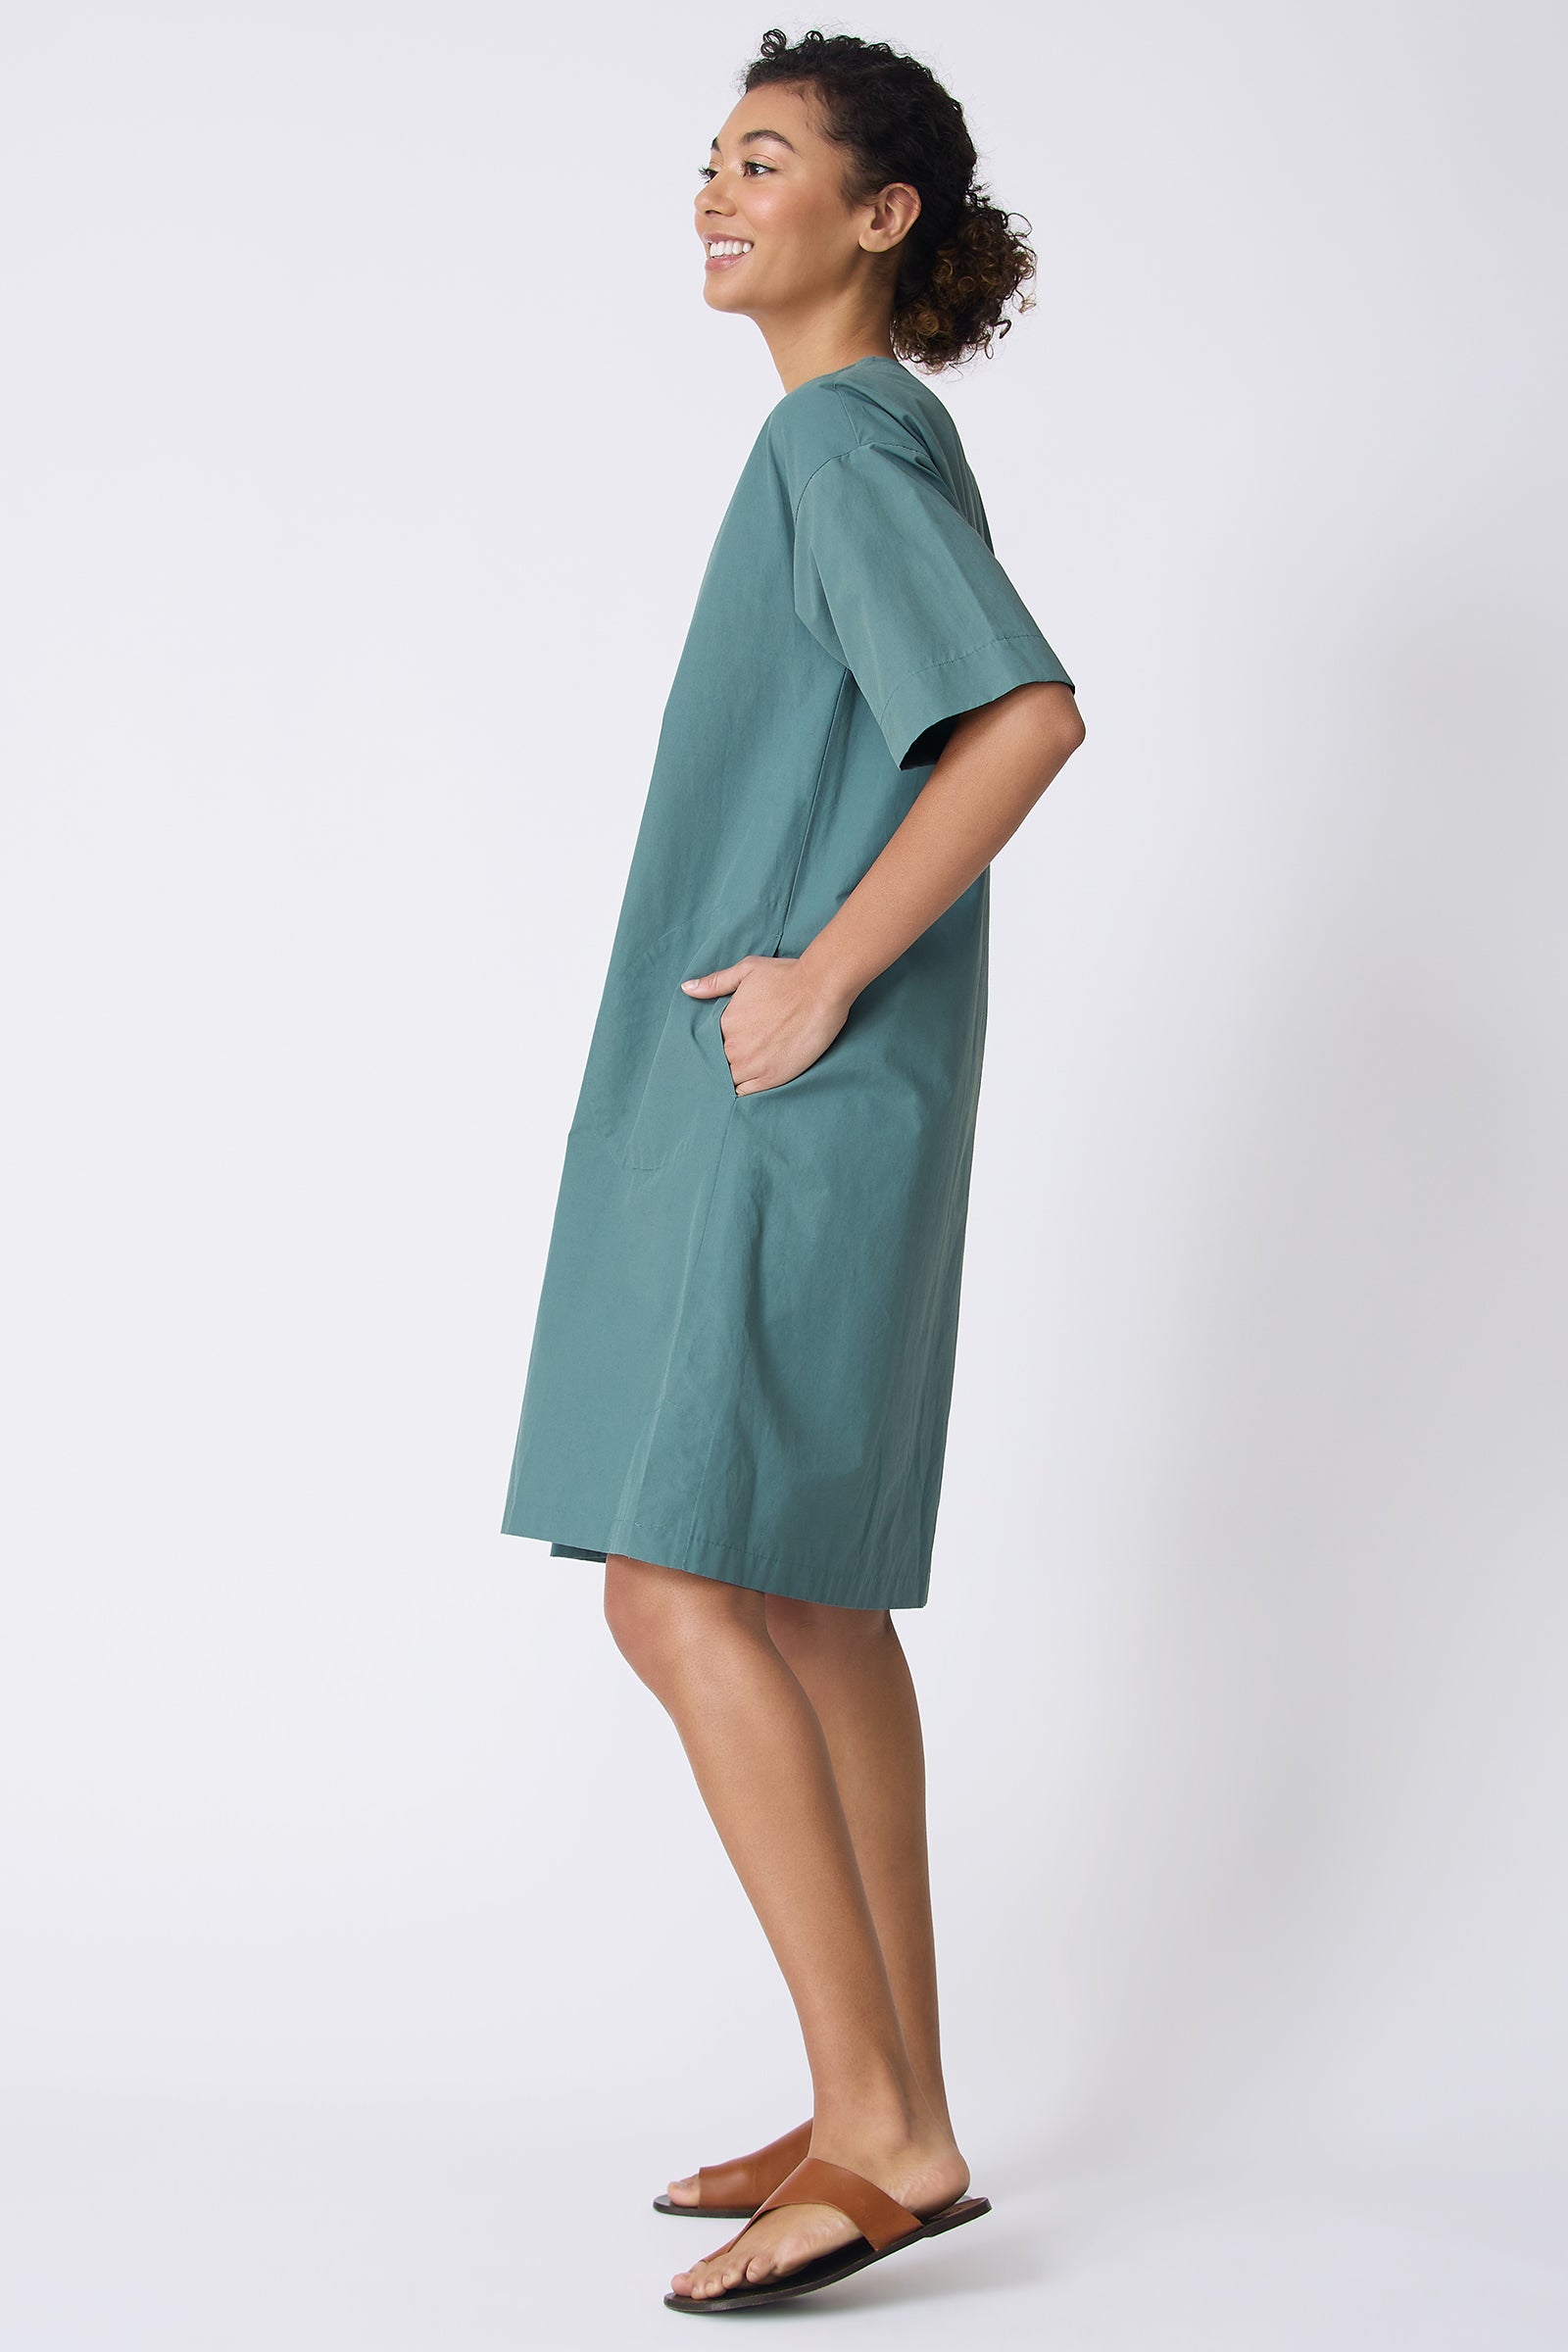 Kal Rieman Cara Fold Front Dress in Sage on model with hand in pocket full side view